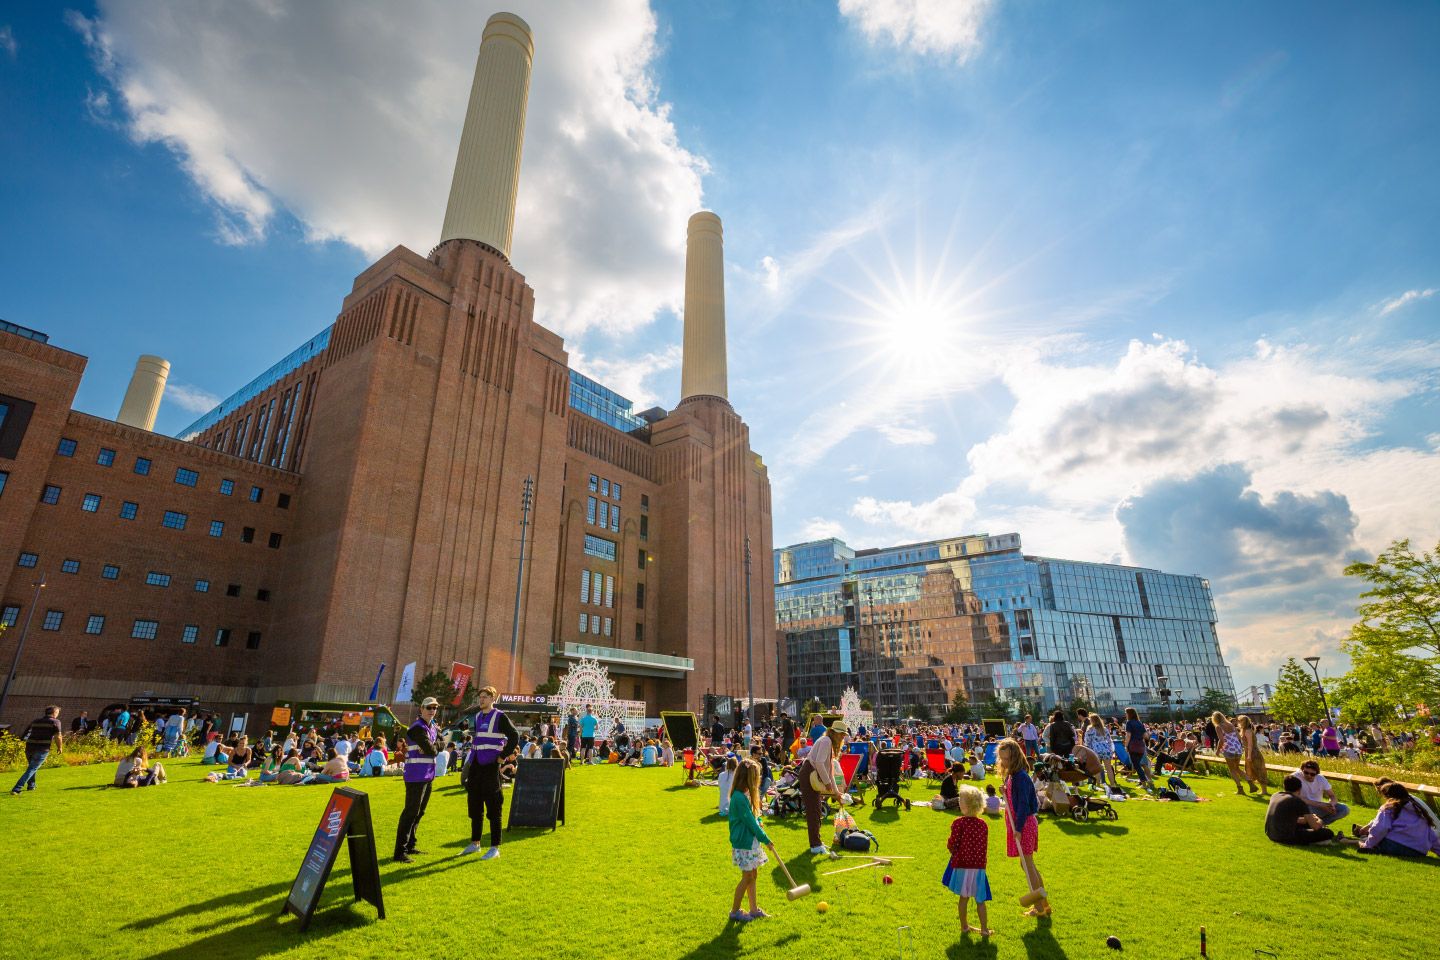 Battersea Power Station – Mother's Day